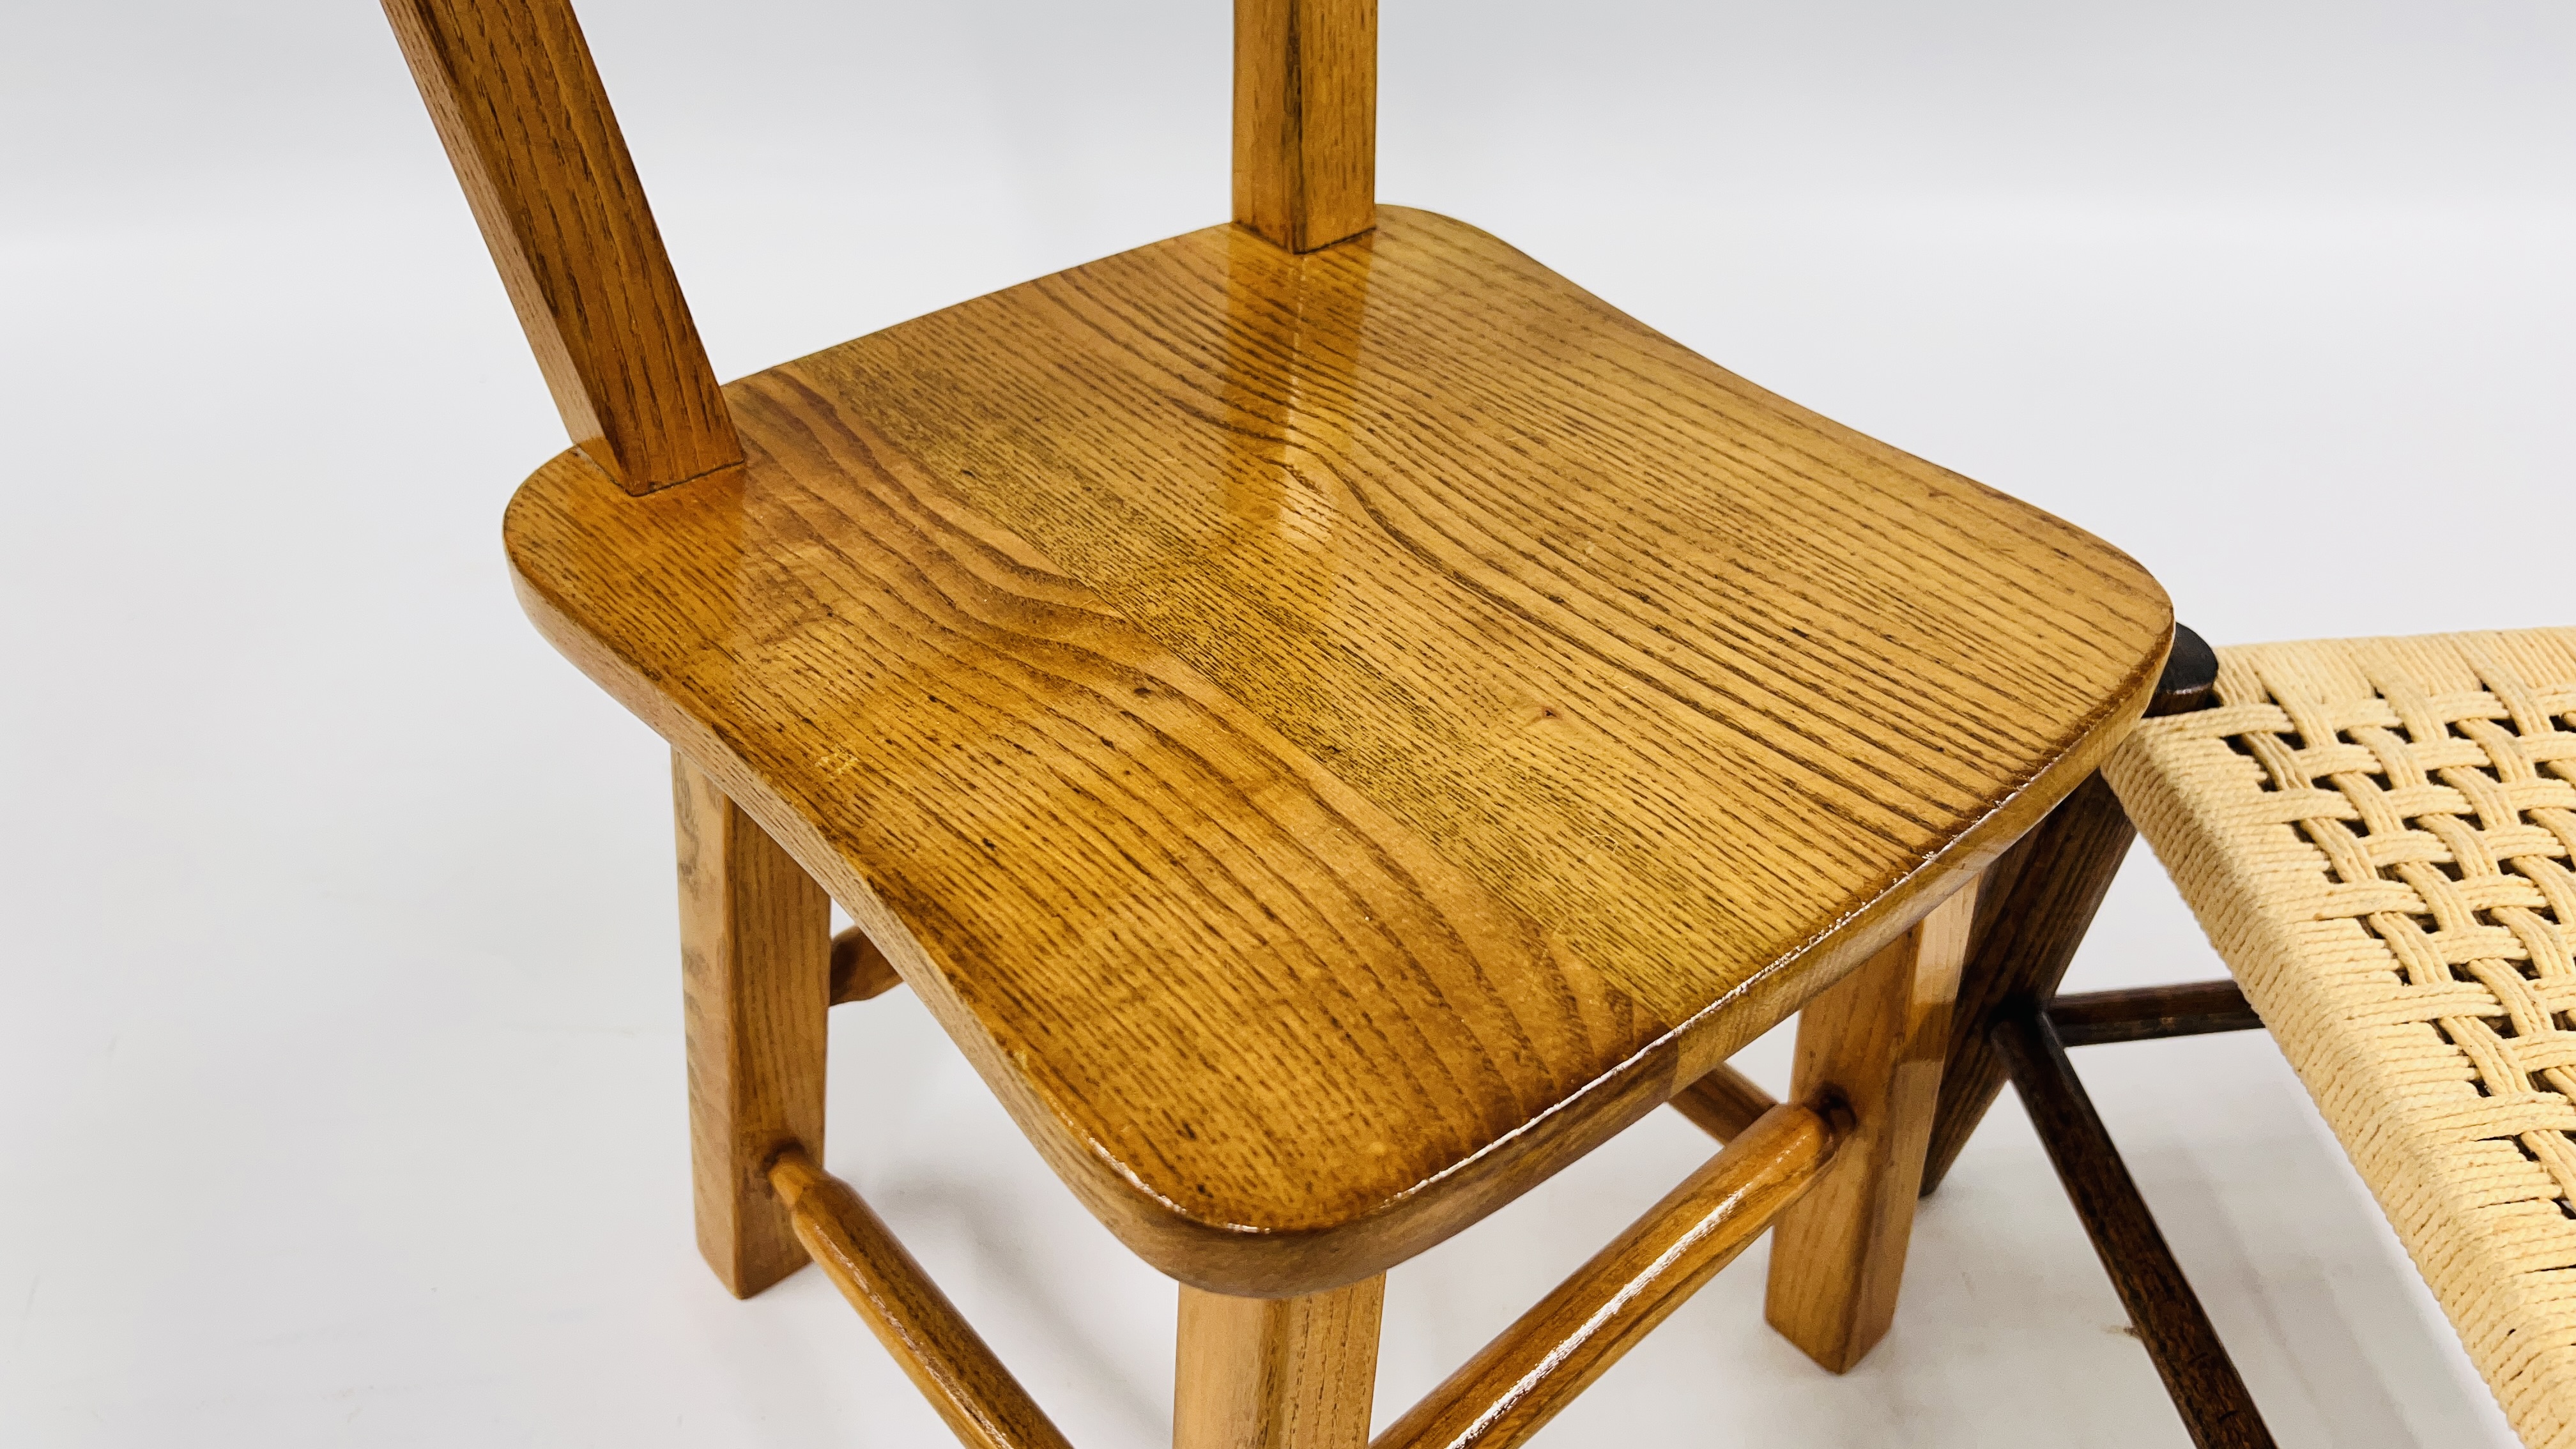 A HANDMADE SOLID OAK CHILD'S CHAIR AND SMALL OAK STOOL WITH WOVEN SEAT. - Image 4 of 9